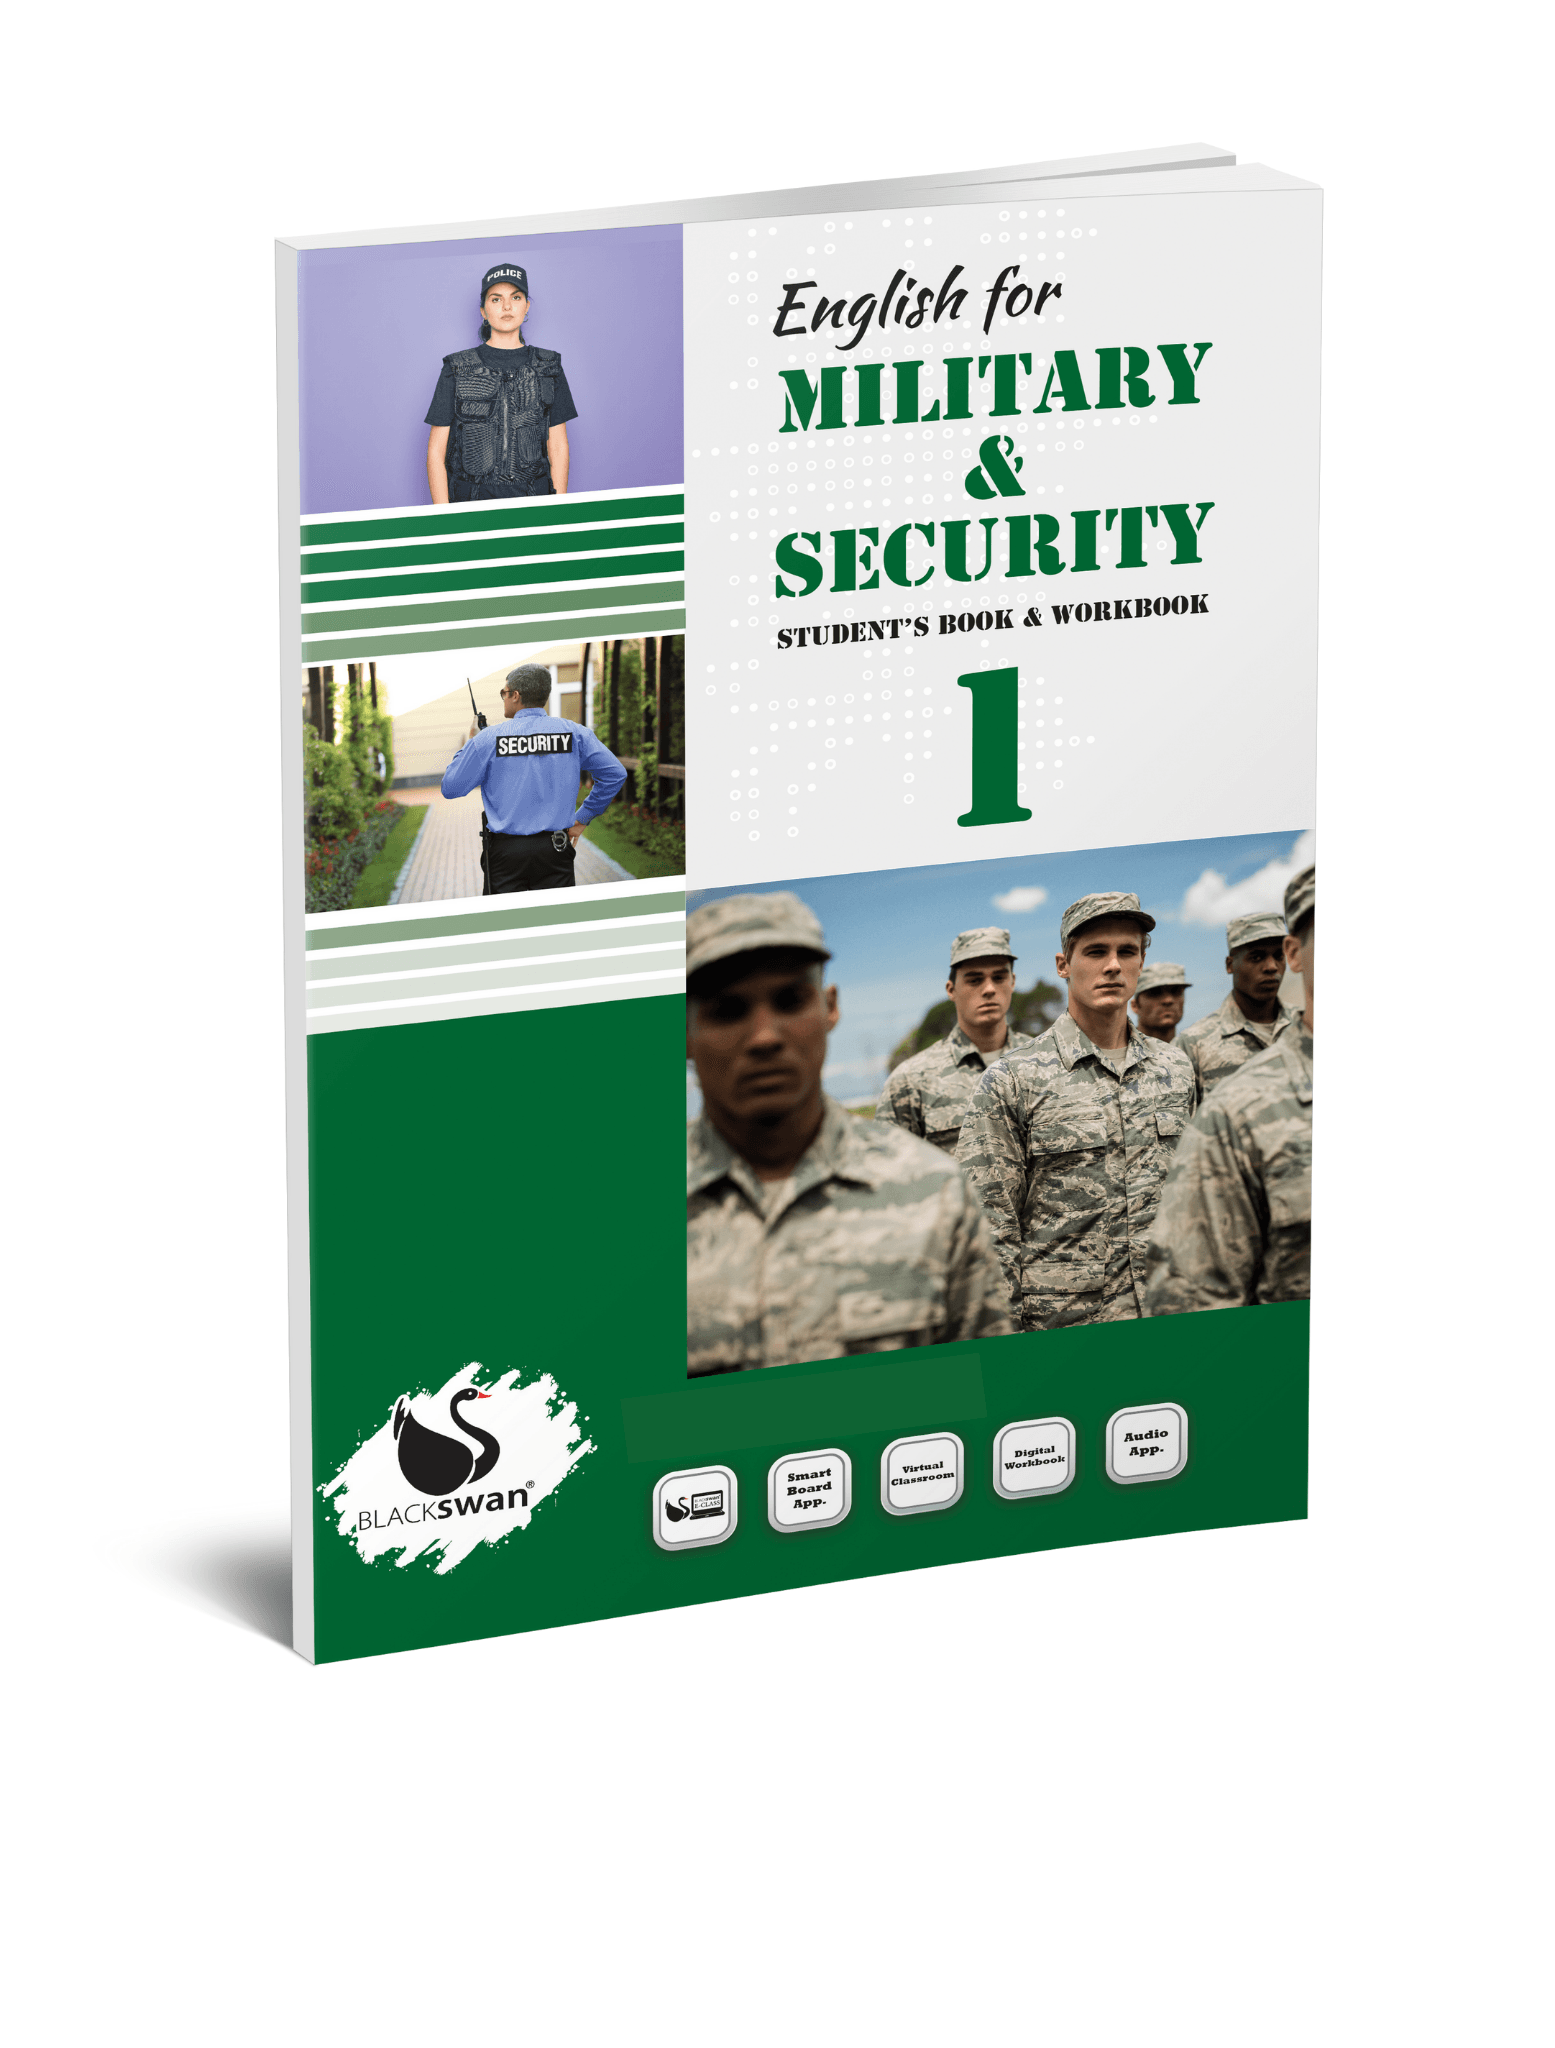 English for Military and Security 1 Student's Book & Workbook